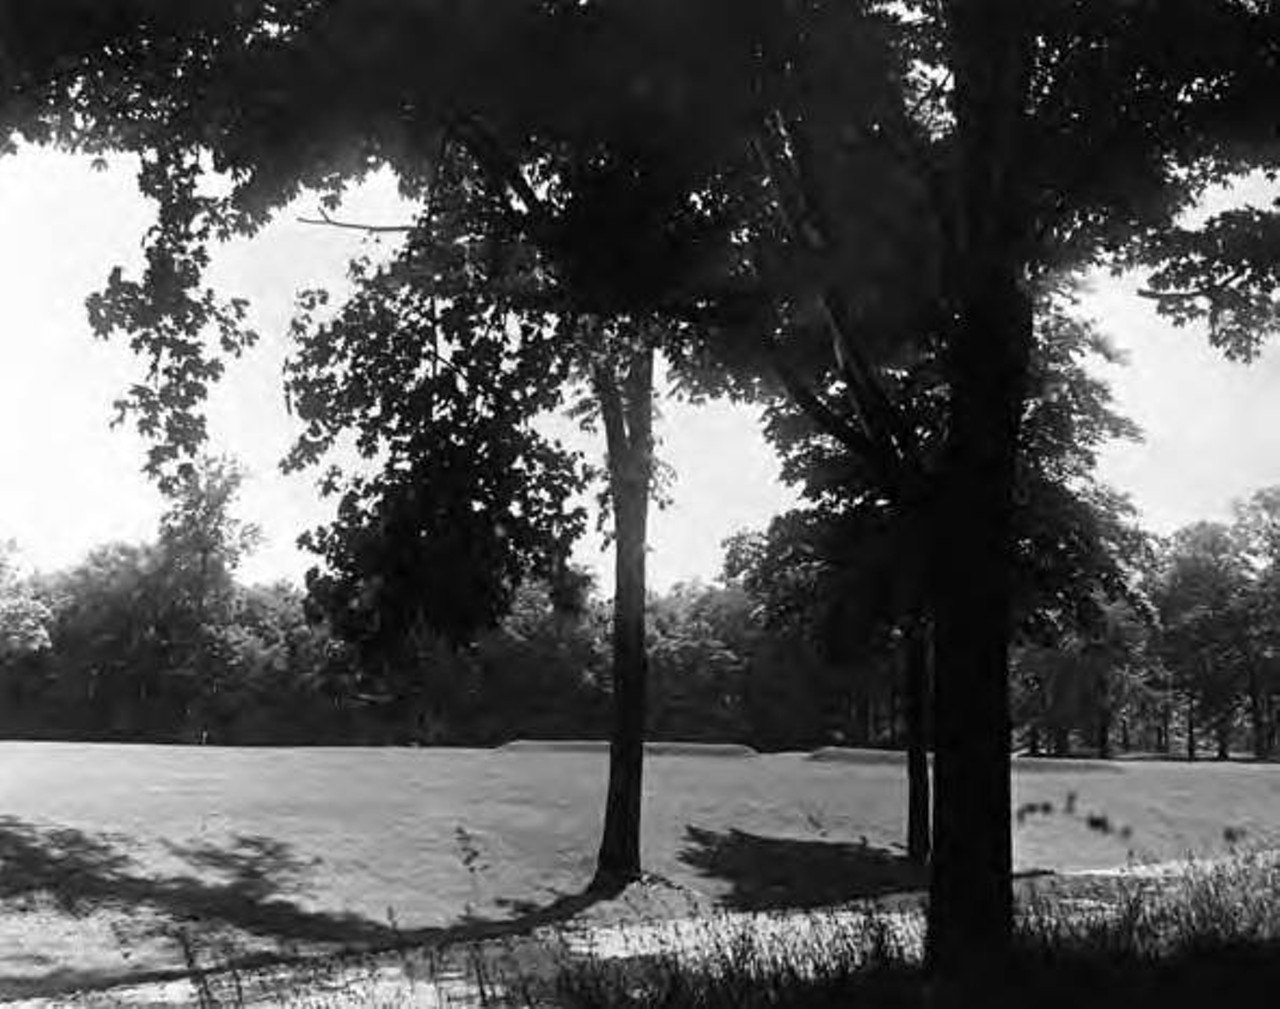  Forest Hills Golf Course, 1928 